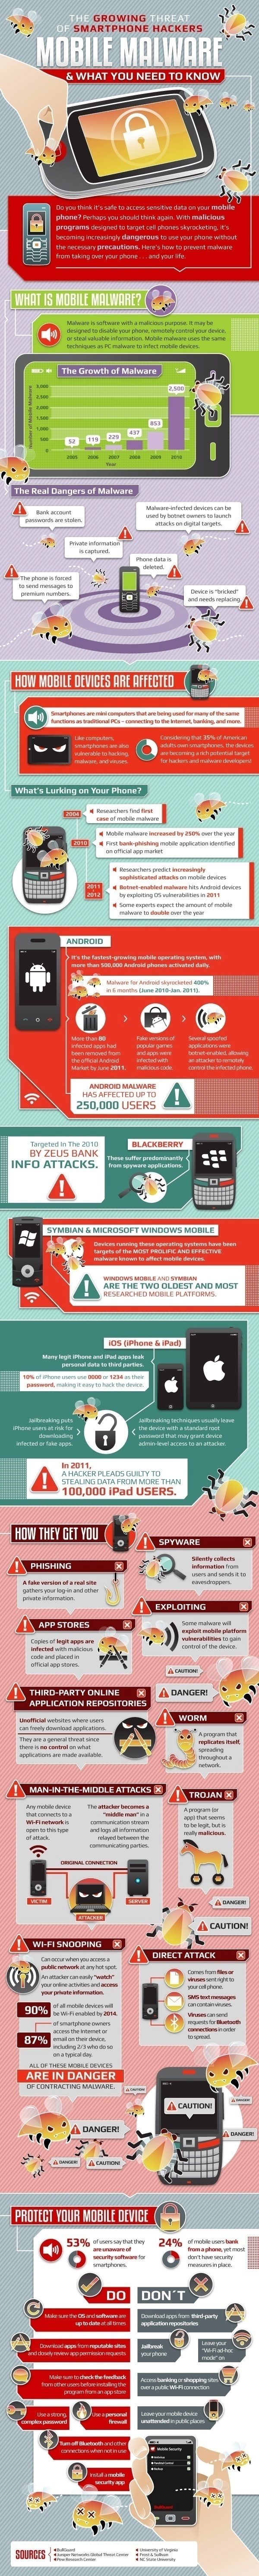 State-of-Mobile-Malware